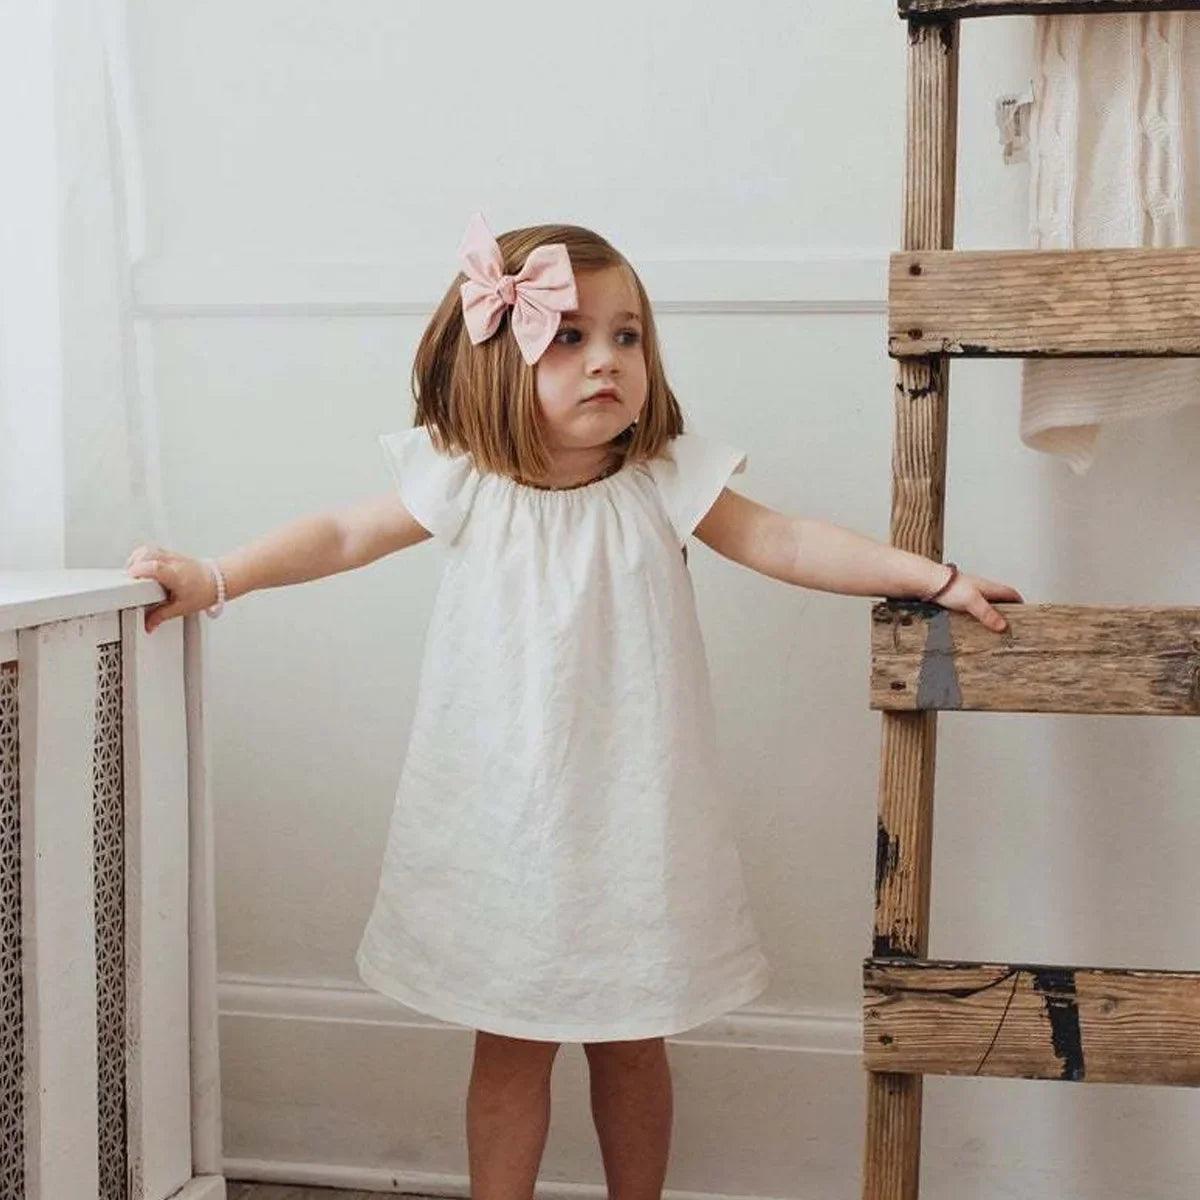 Summer Cotton Baby Girl Dress - Comfortable and Stylish Home Wear for Infants  ourlum.com White 2-3 years 